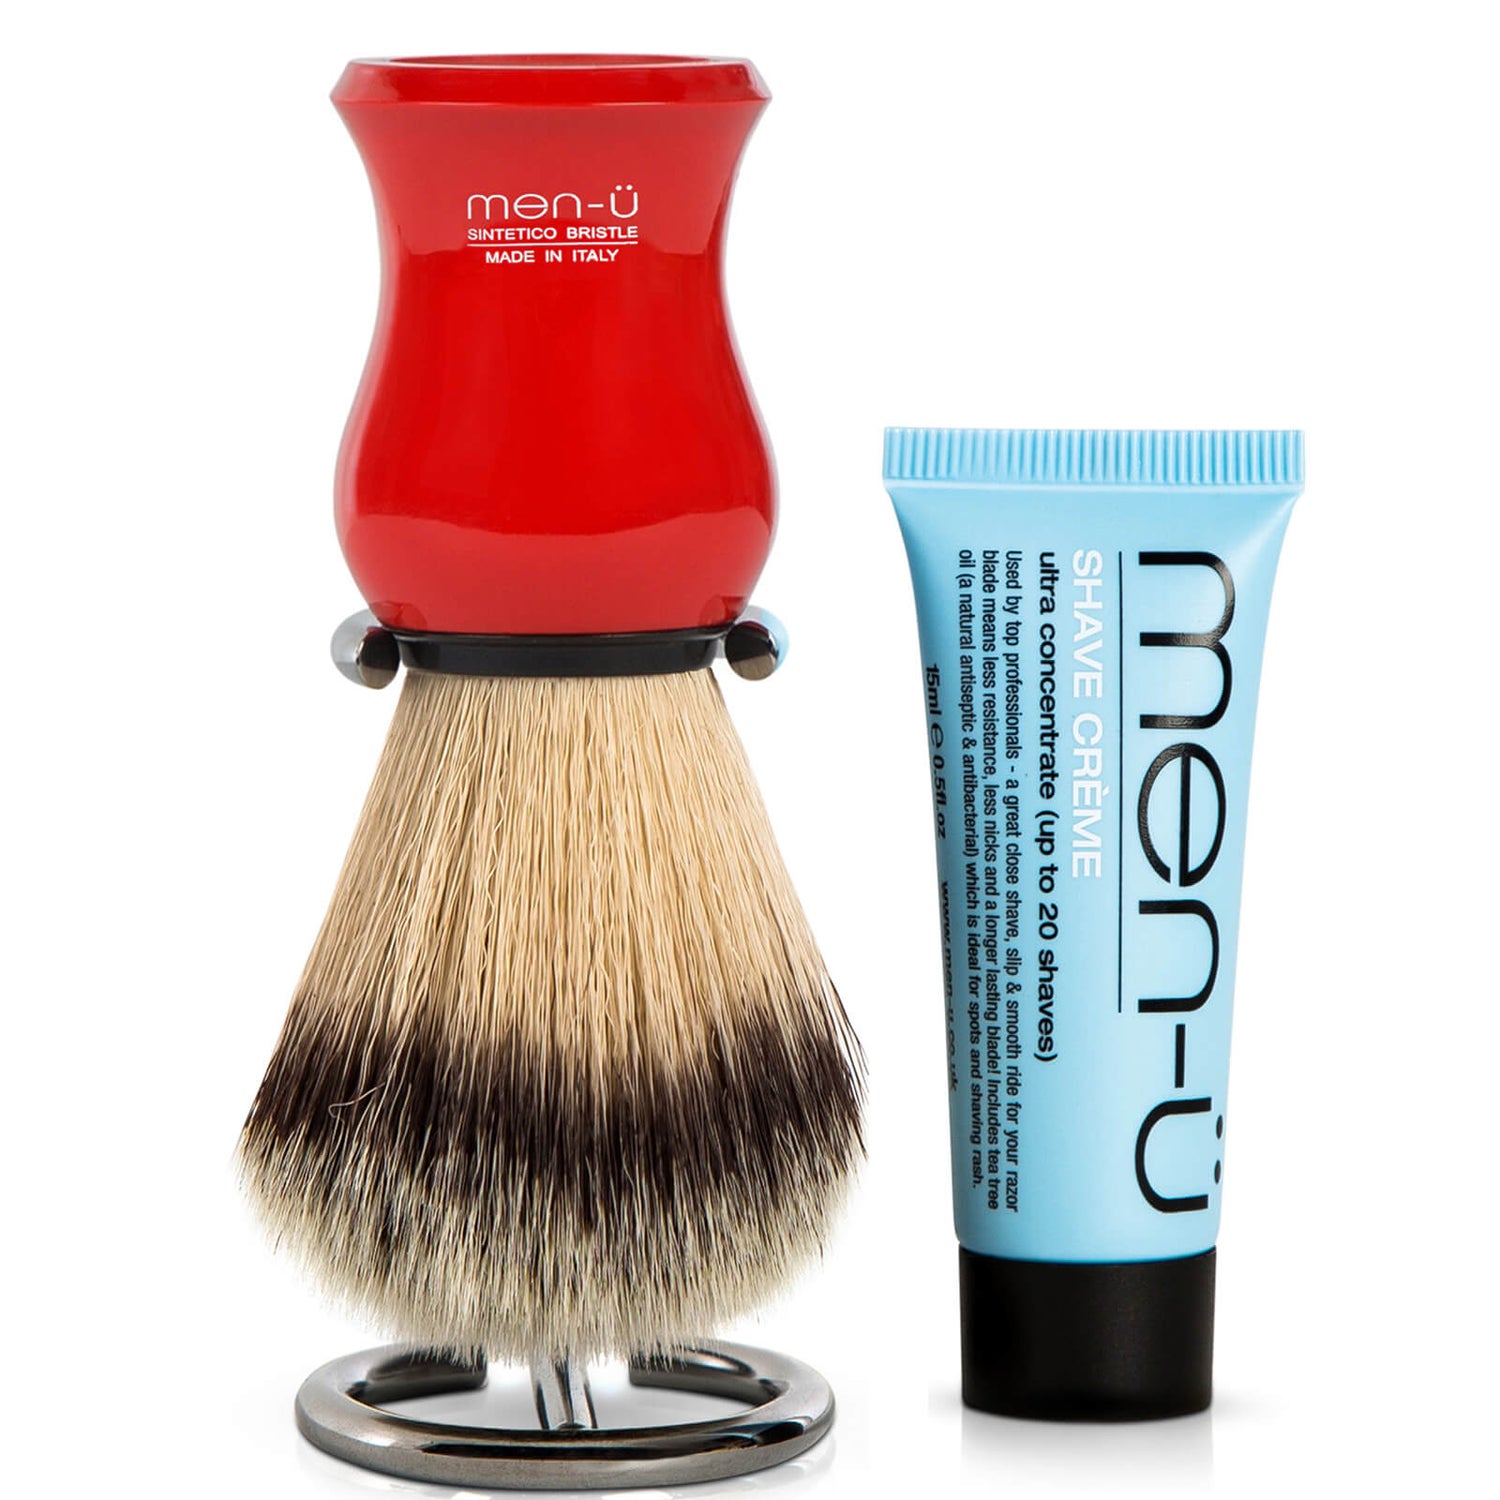 men-ü DB Premier Shave Brush with Chrome Stand - Red